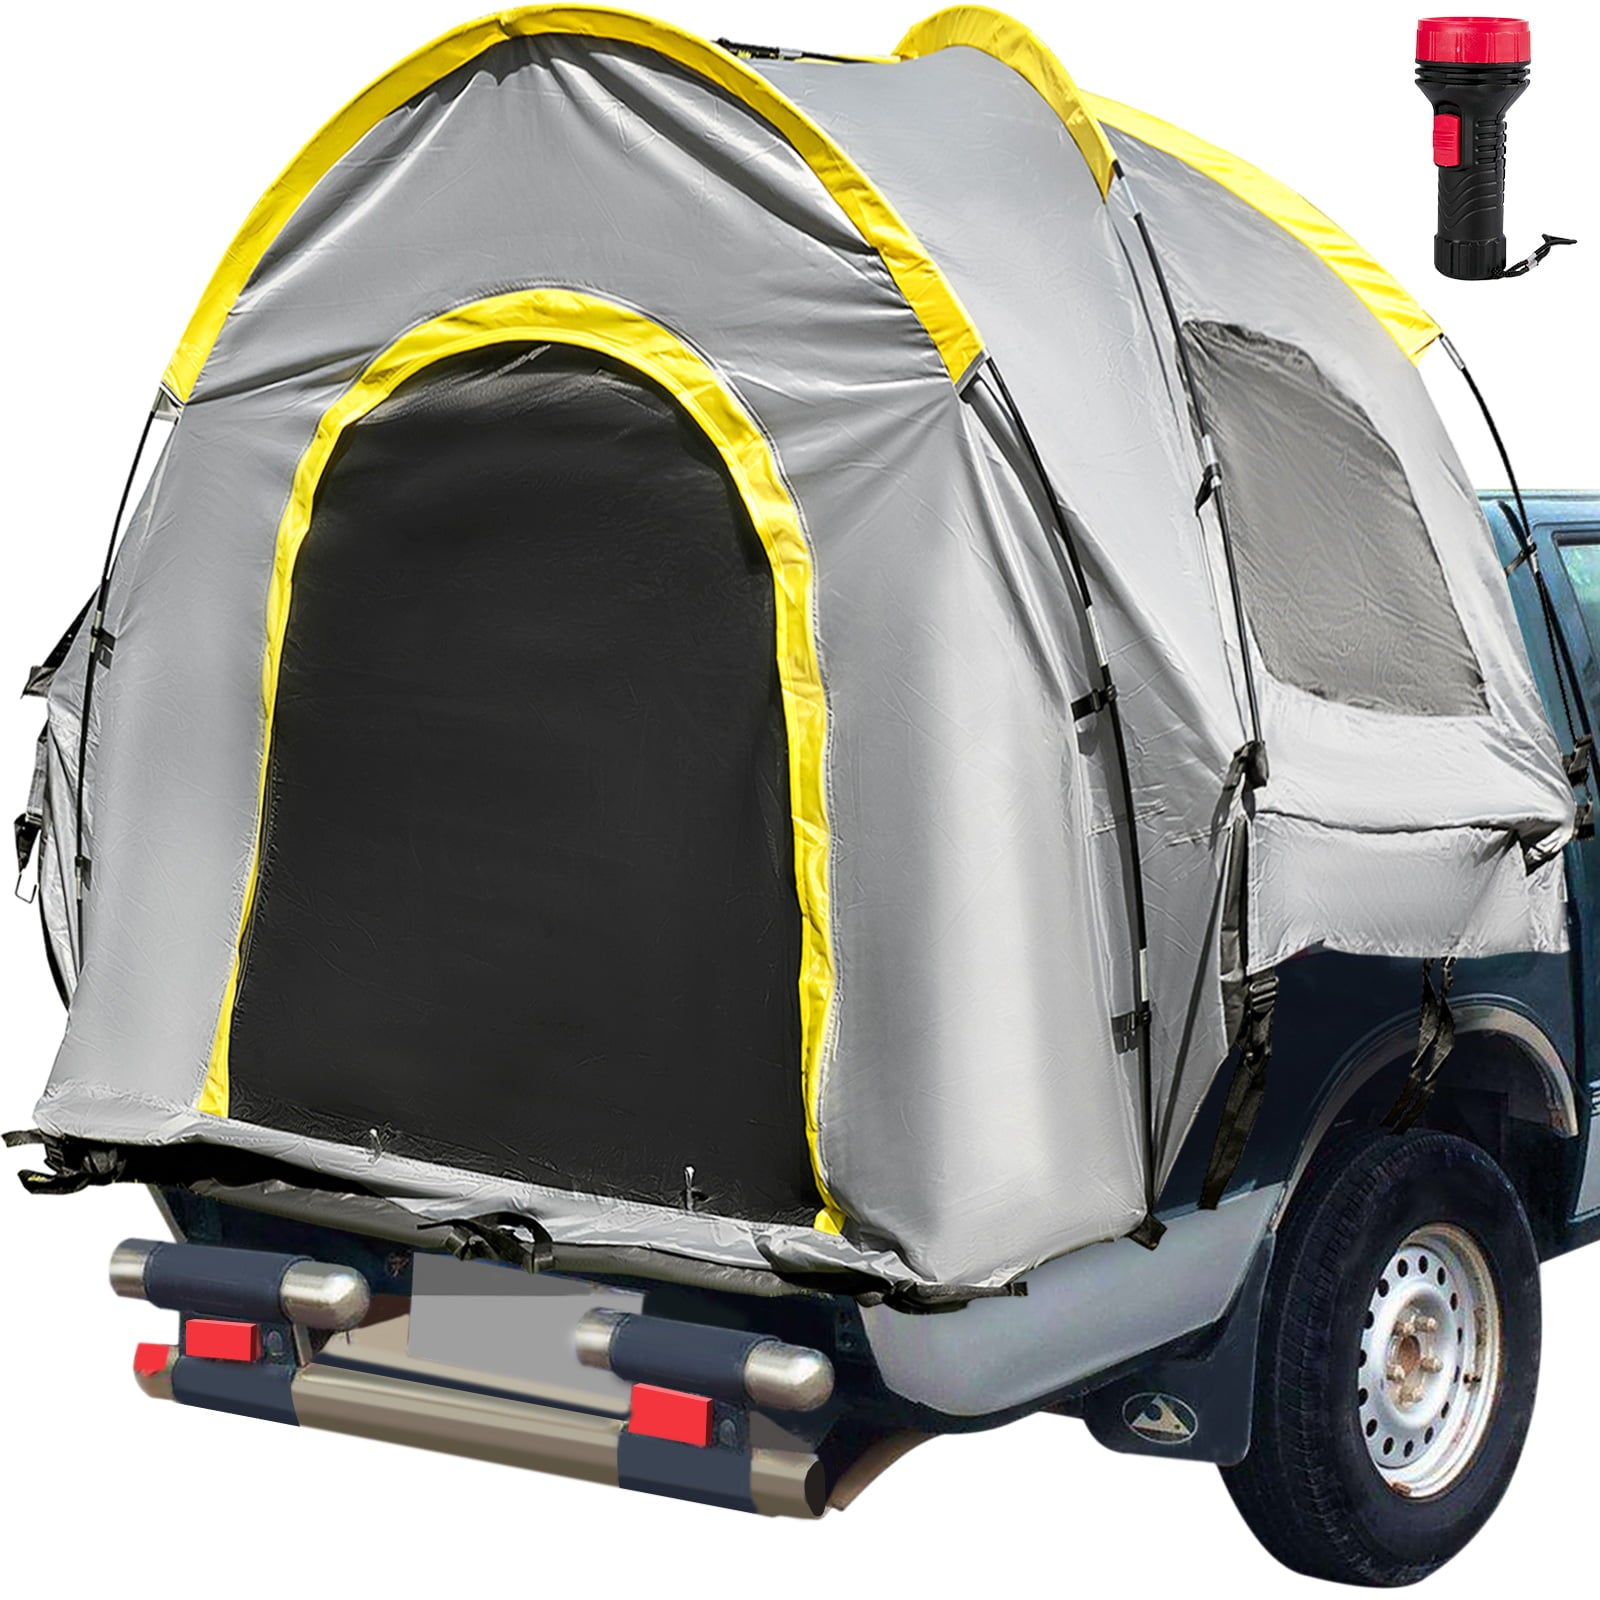 VEVOR Truck Tent 6in Tall Bed Truck Bed Tent， Pickup Tent for Mid Size Truck， Waterproof Truck Camper， 2-Person Sleeping Capacity， 2 Mesh Windows， Easy to Setup Truck Tents for Camping， Hiking